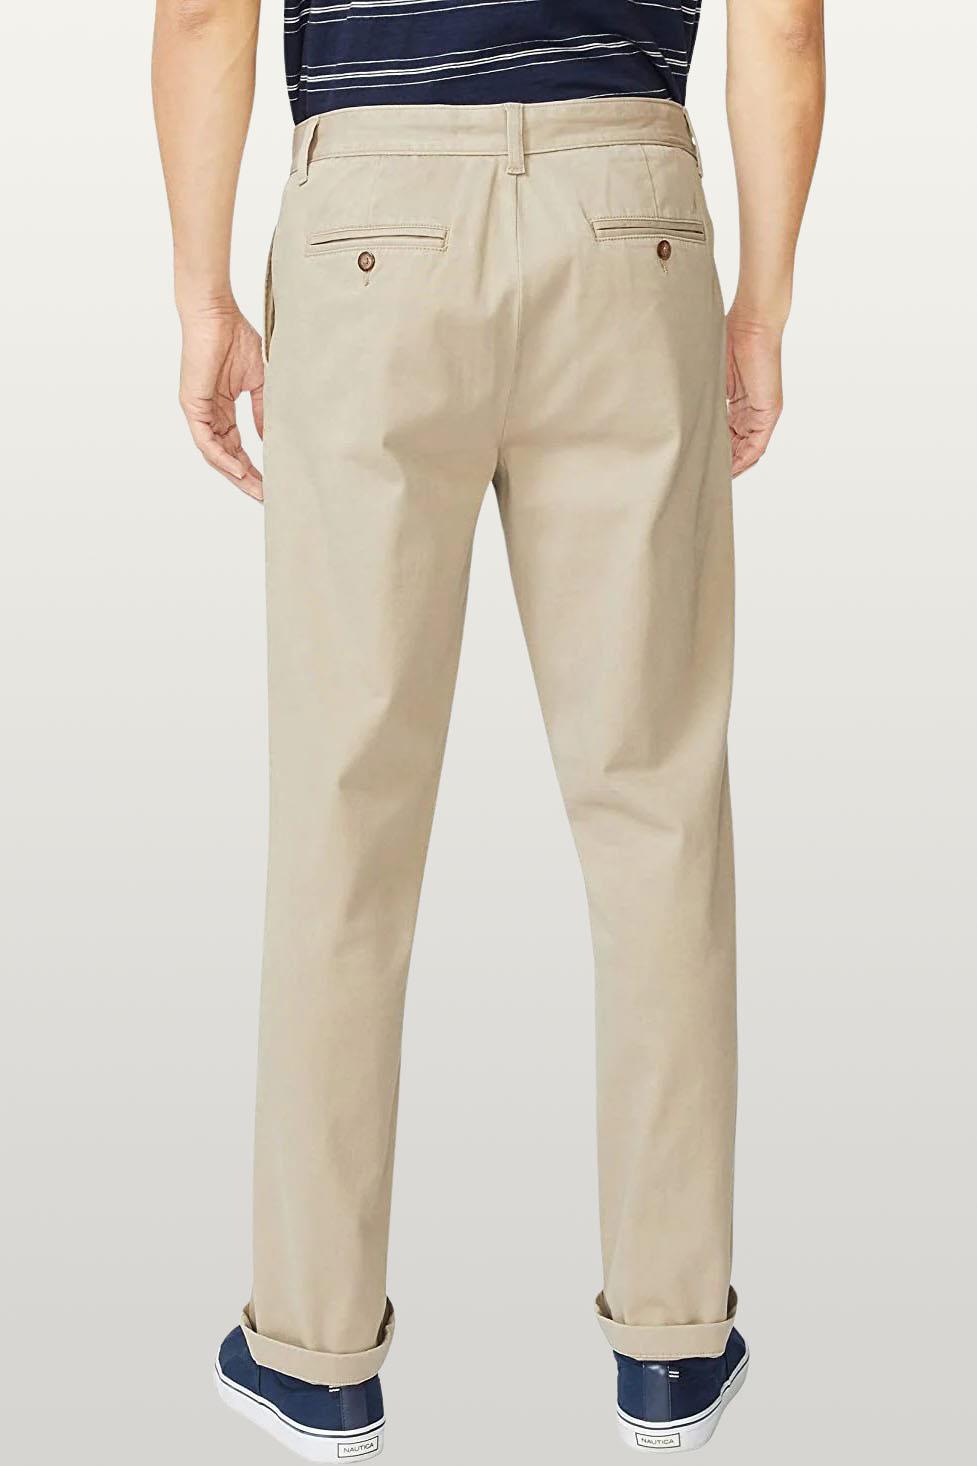 Mens Cotton Chino Trousers